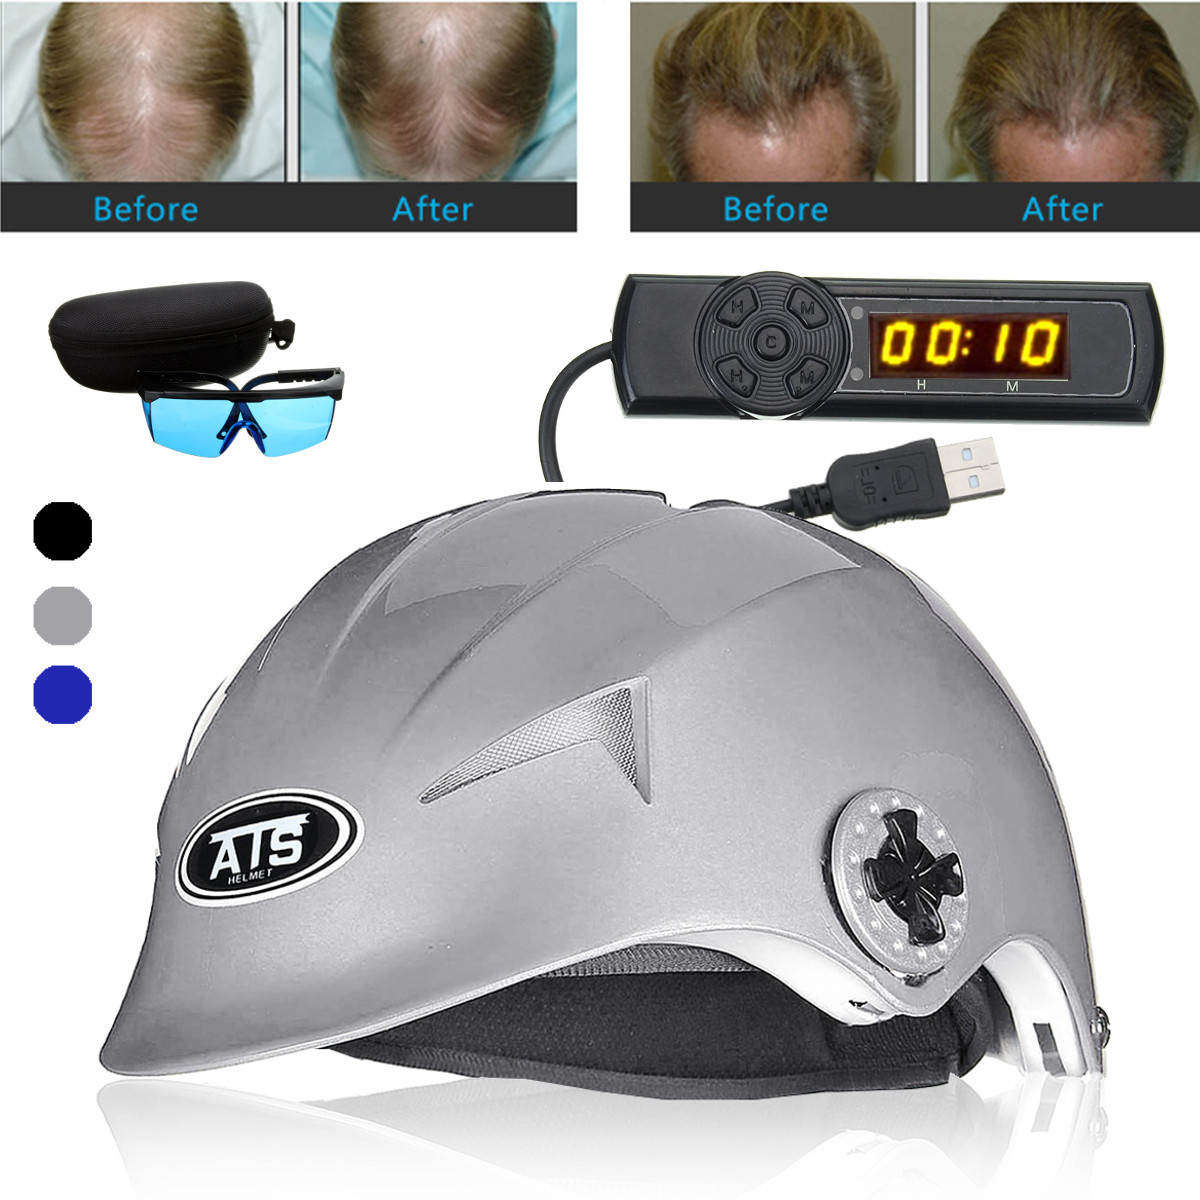 64 Medical Diodes Laser Hair Loss Treatment Solution Helmet Cap Fast Regrowth Oil Control Glasses